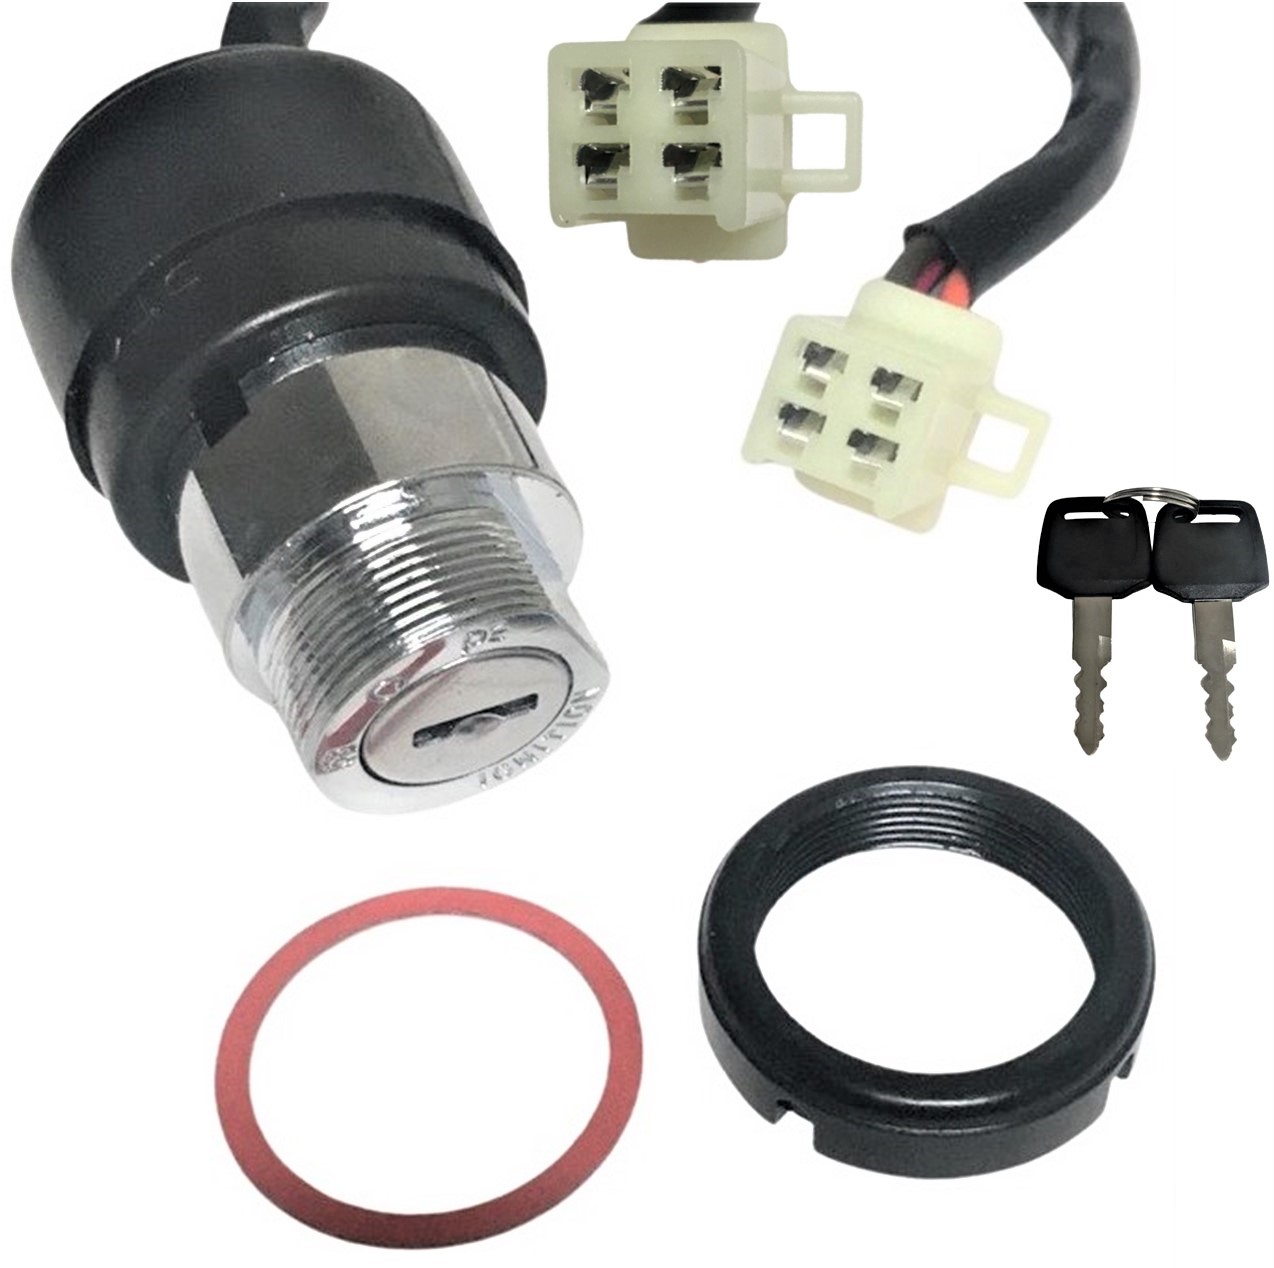 Ignition Switch Fits Many ATVs, Dirtbikes 4 Pin in 4 Pin Male Jack